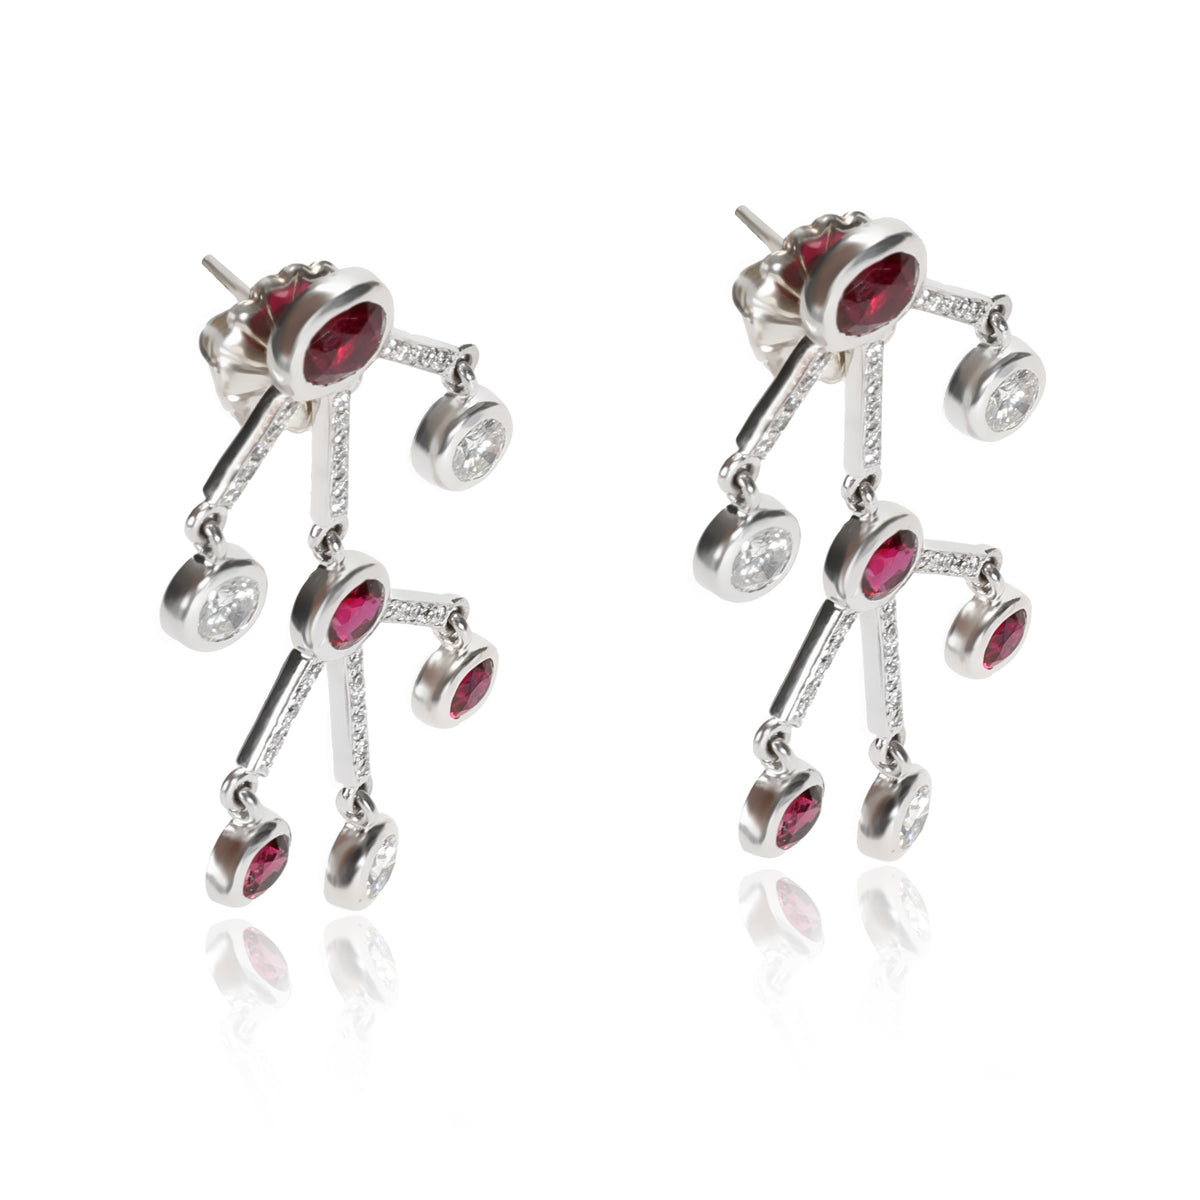 Solange Azagury-Partridge Ruby and Diamond Earrings in 18KT White Gold